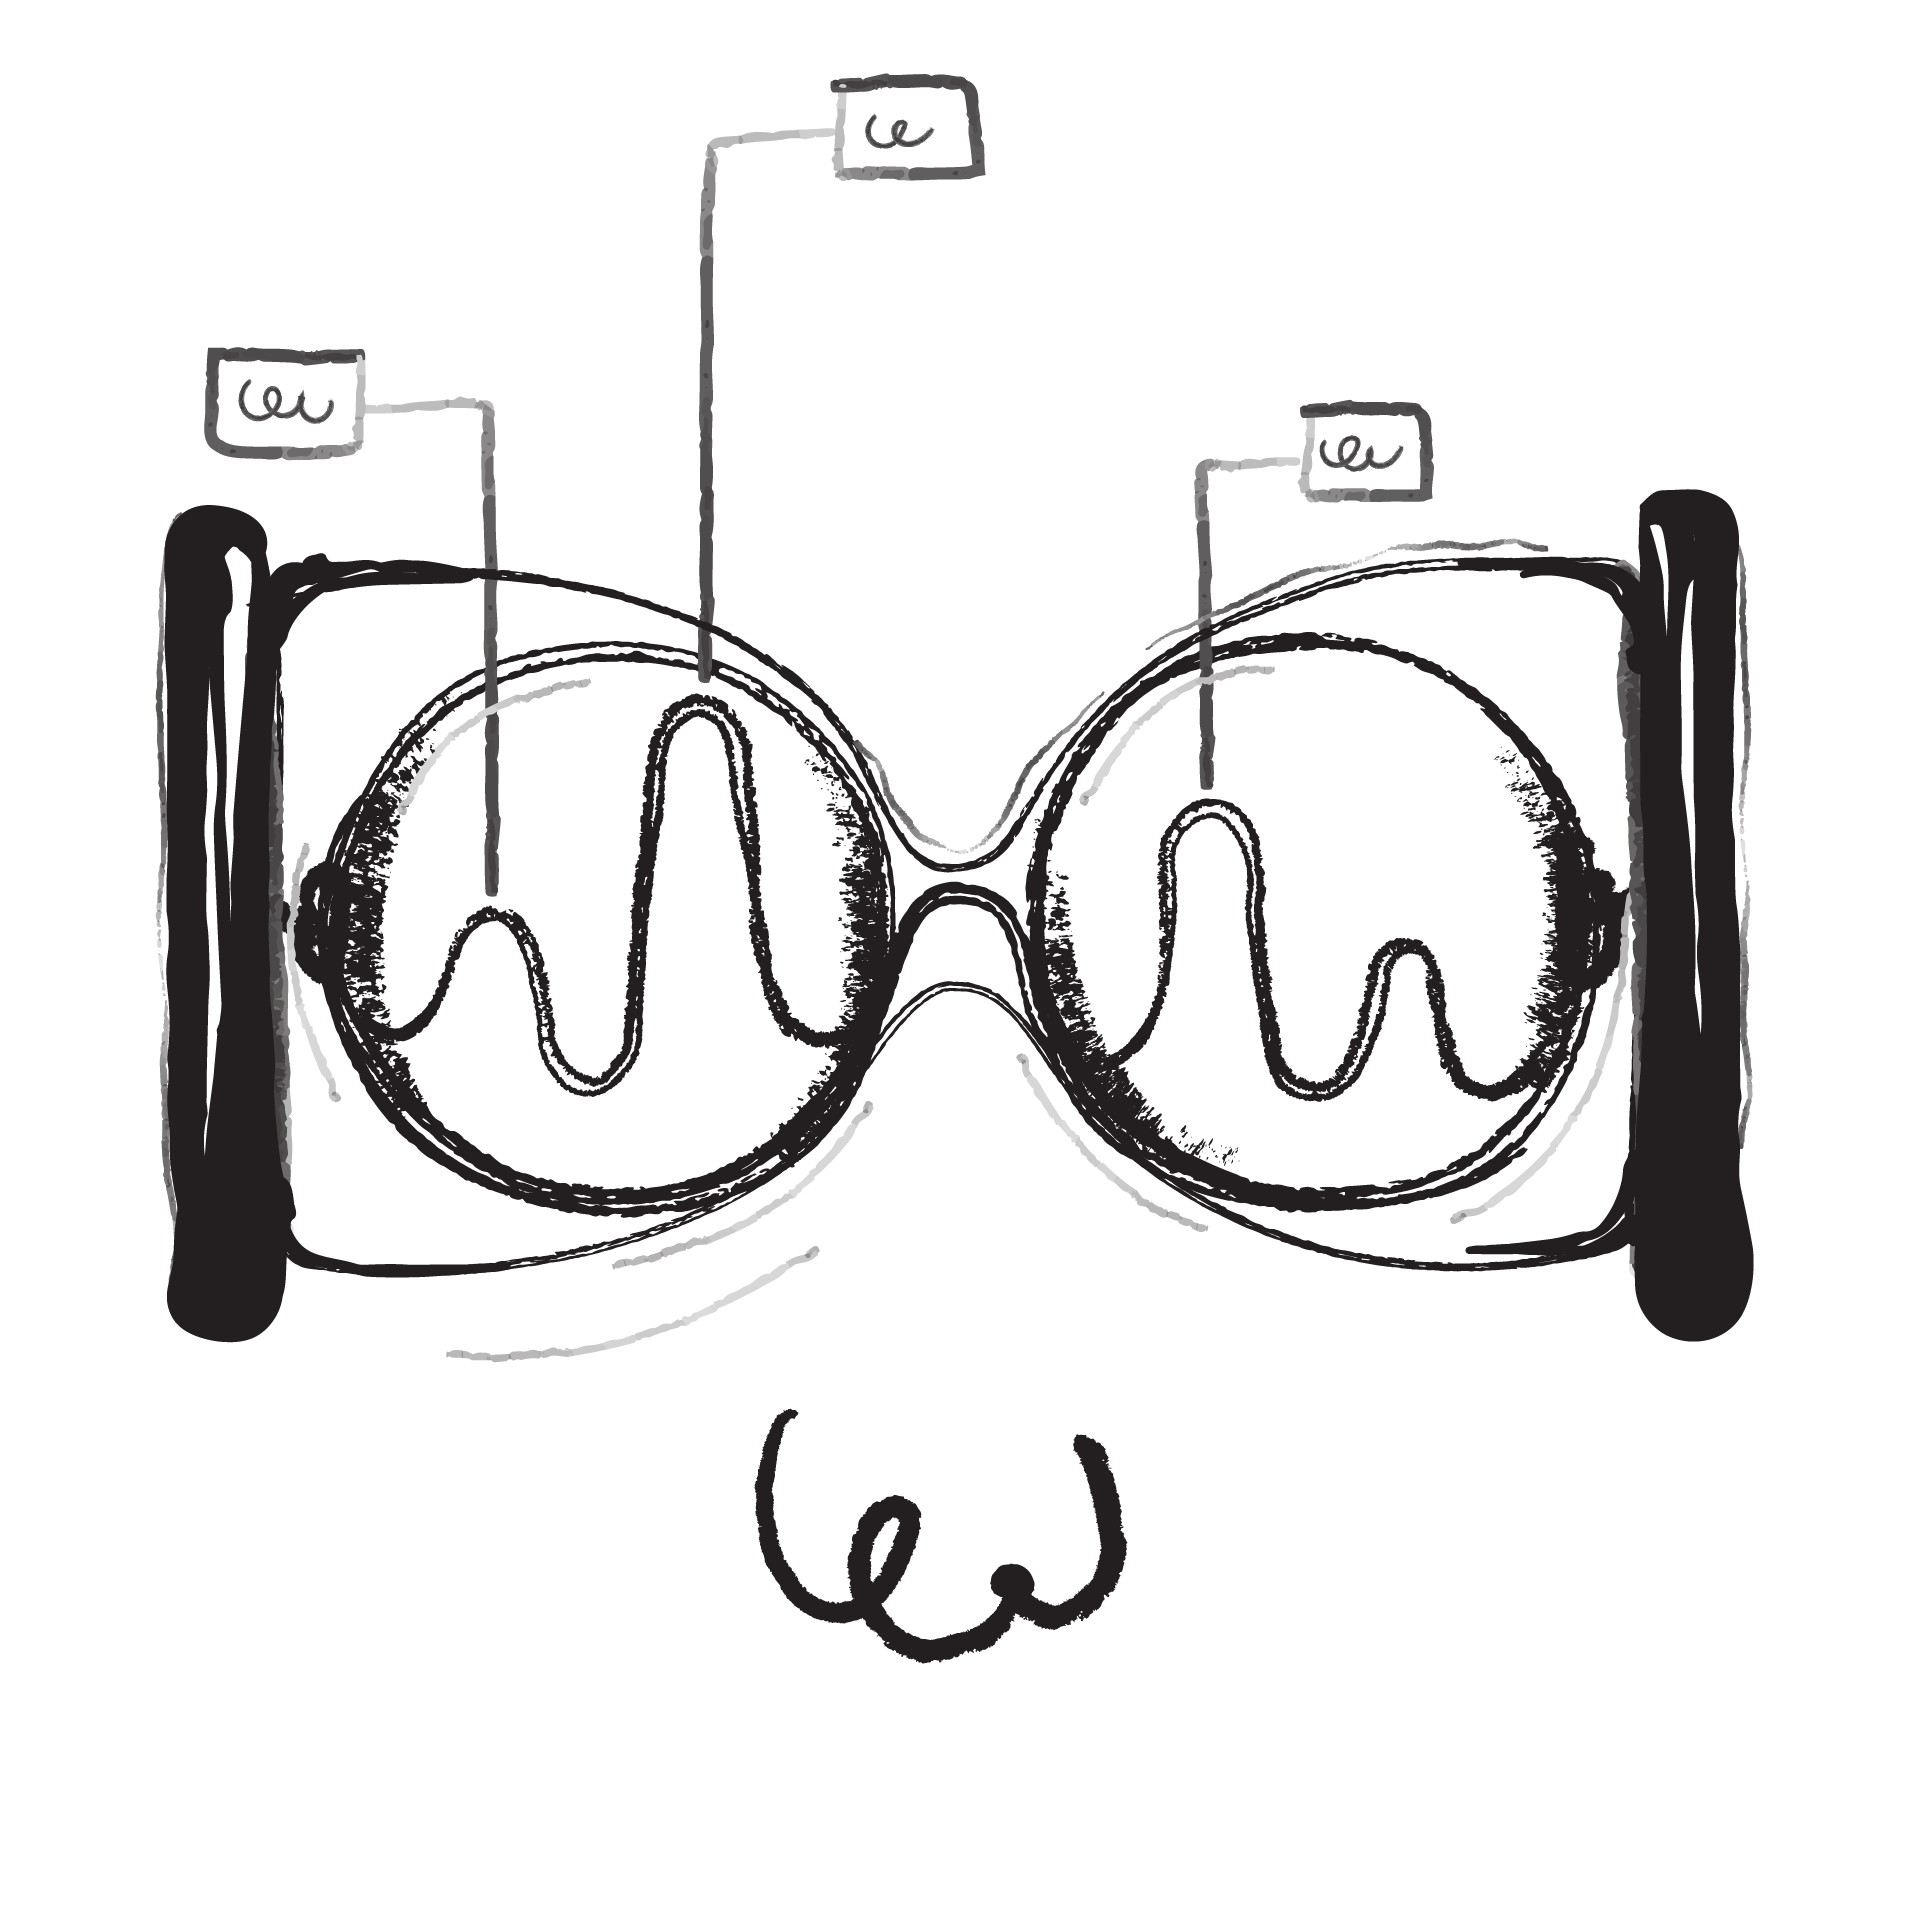 Abstract illustration of glasses 